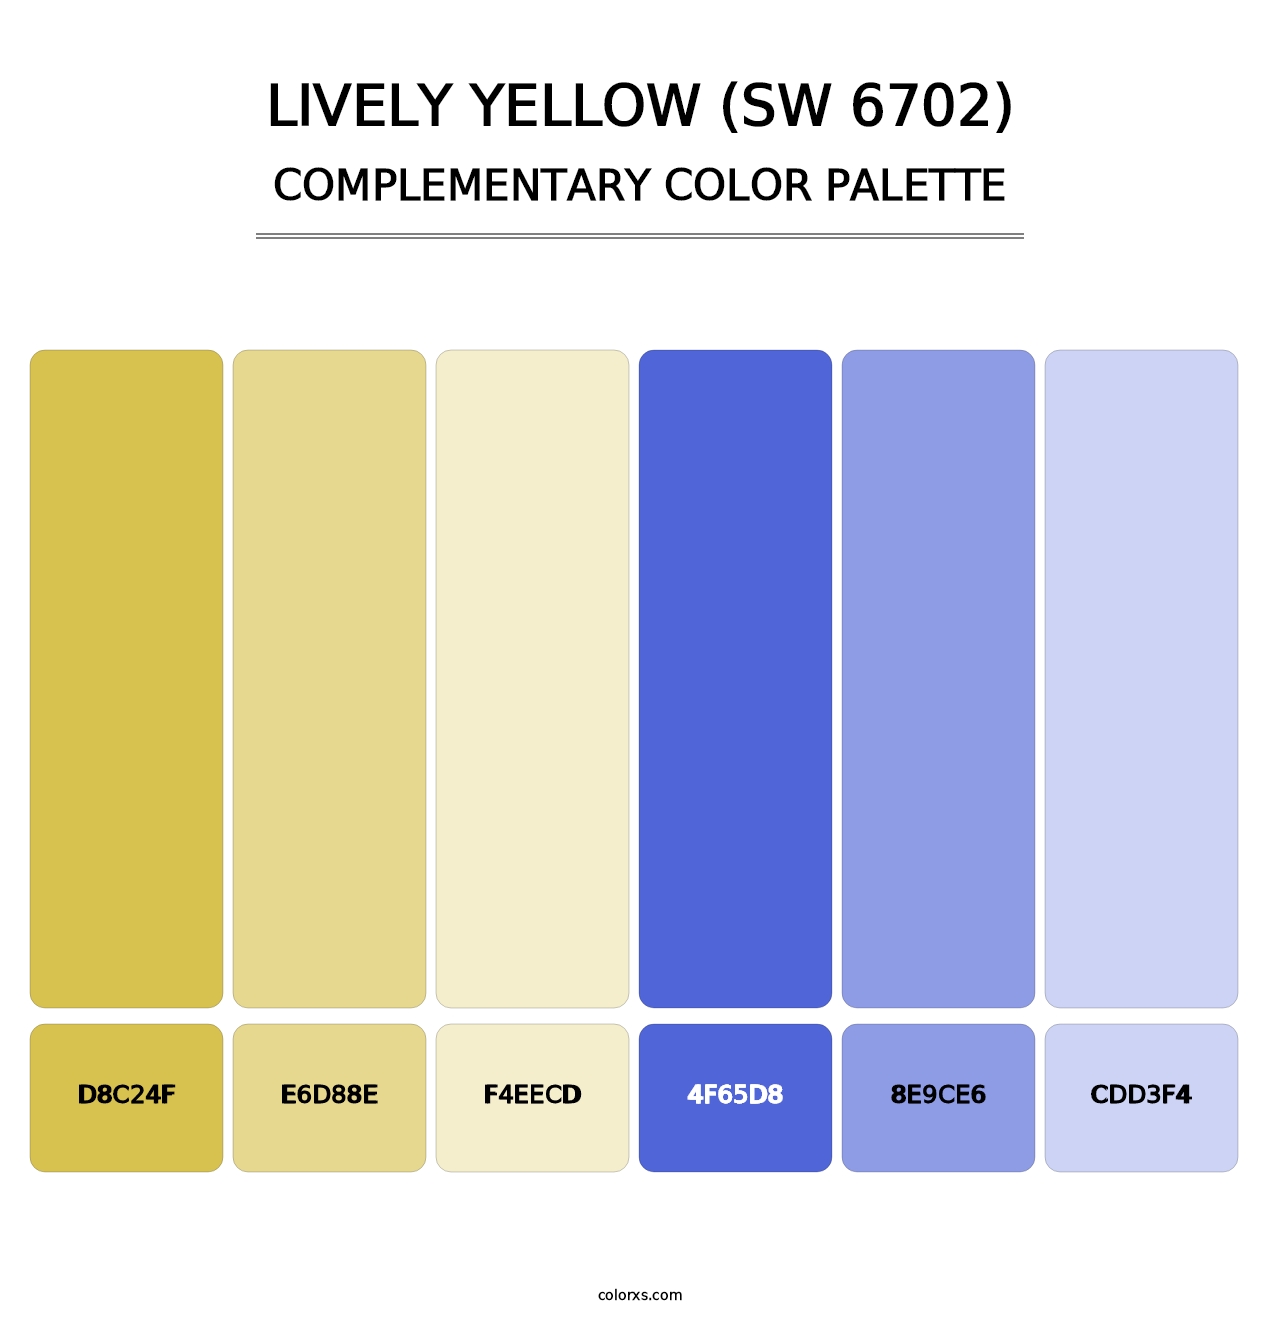 Lively Yellow (SW 6702) - Complementary Color Palette